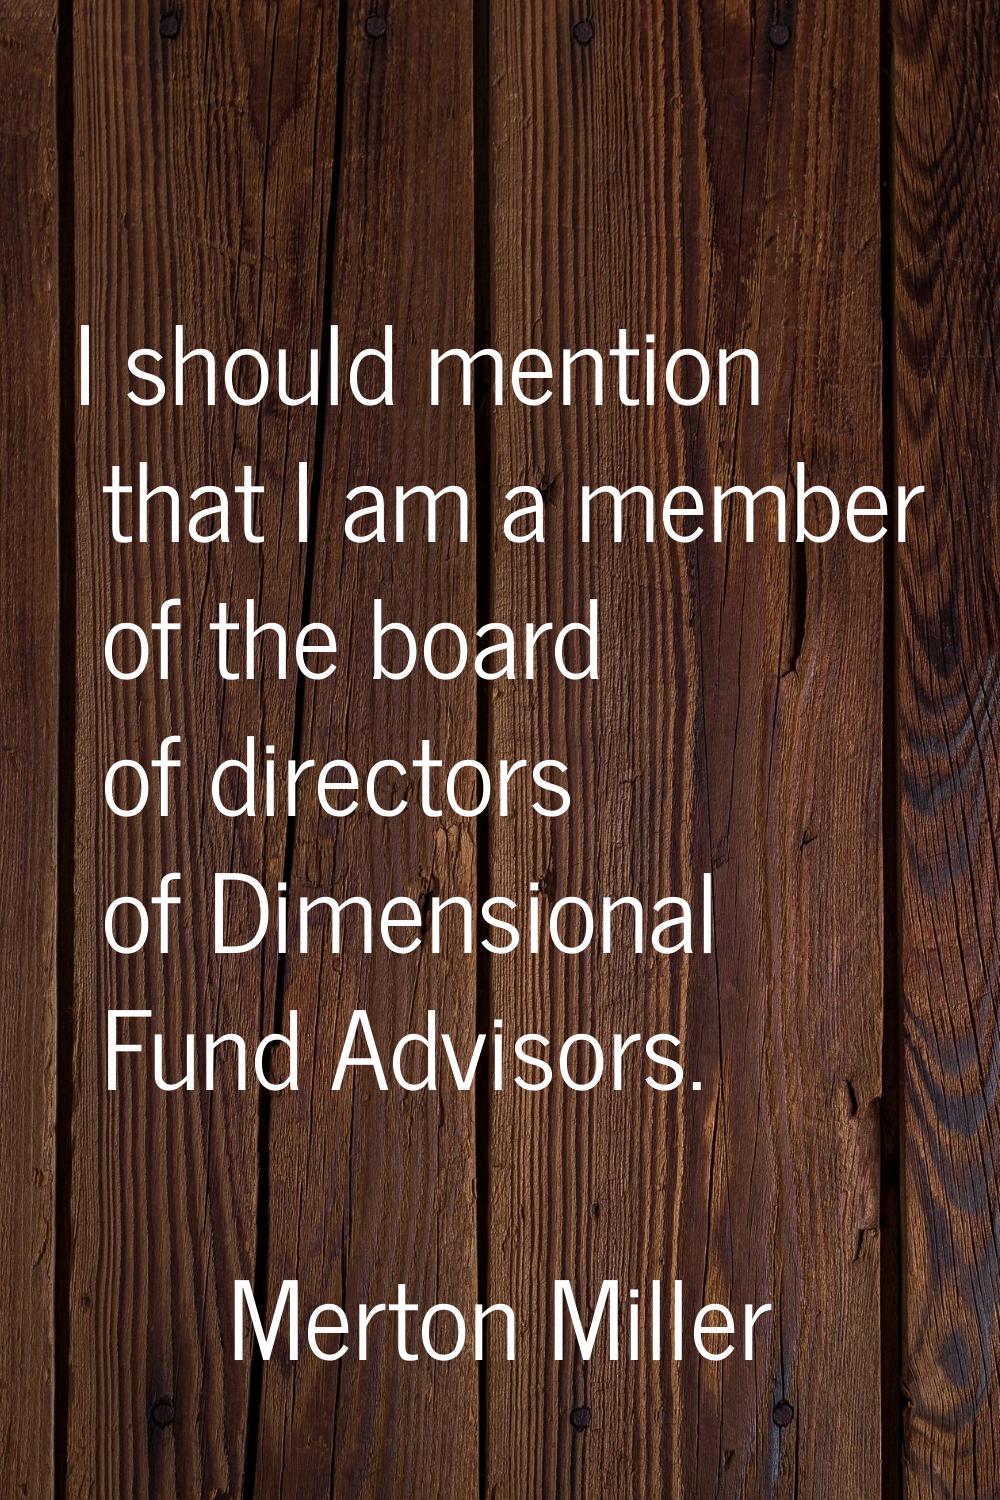 I should mention that I am a member of the board of directors of Dimensional Fund Advisors.